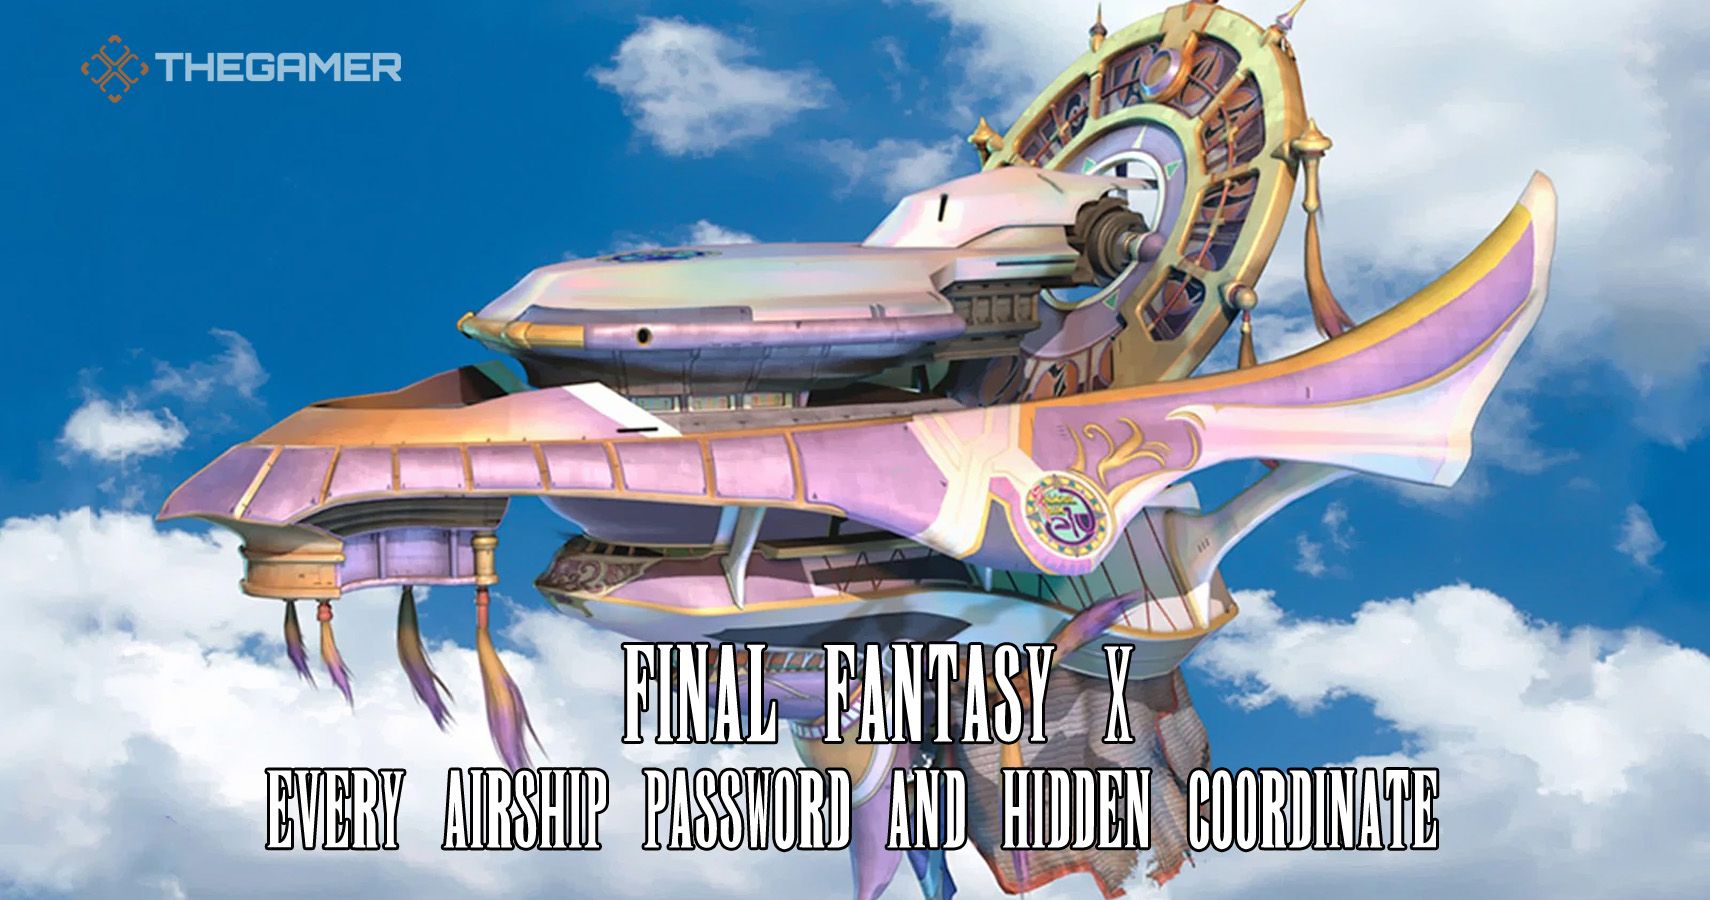 Final Fantasy 10 Every Airship Password And Hidden Coordinate